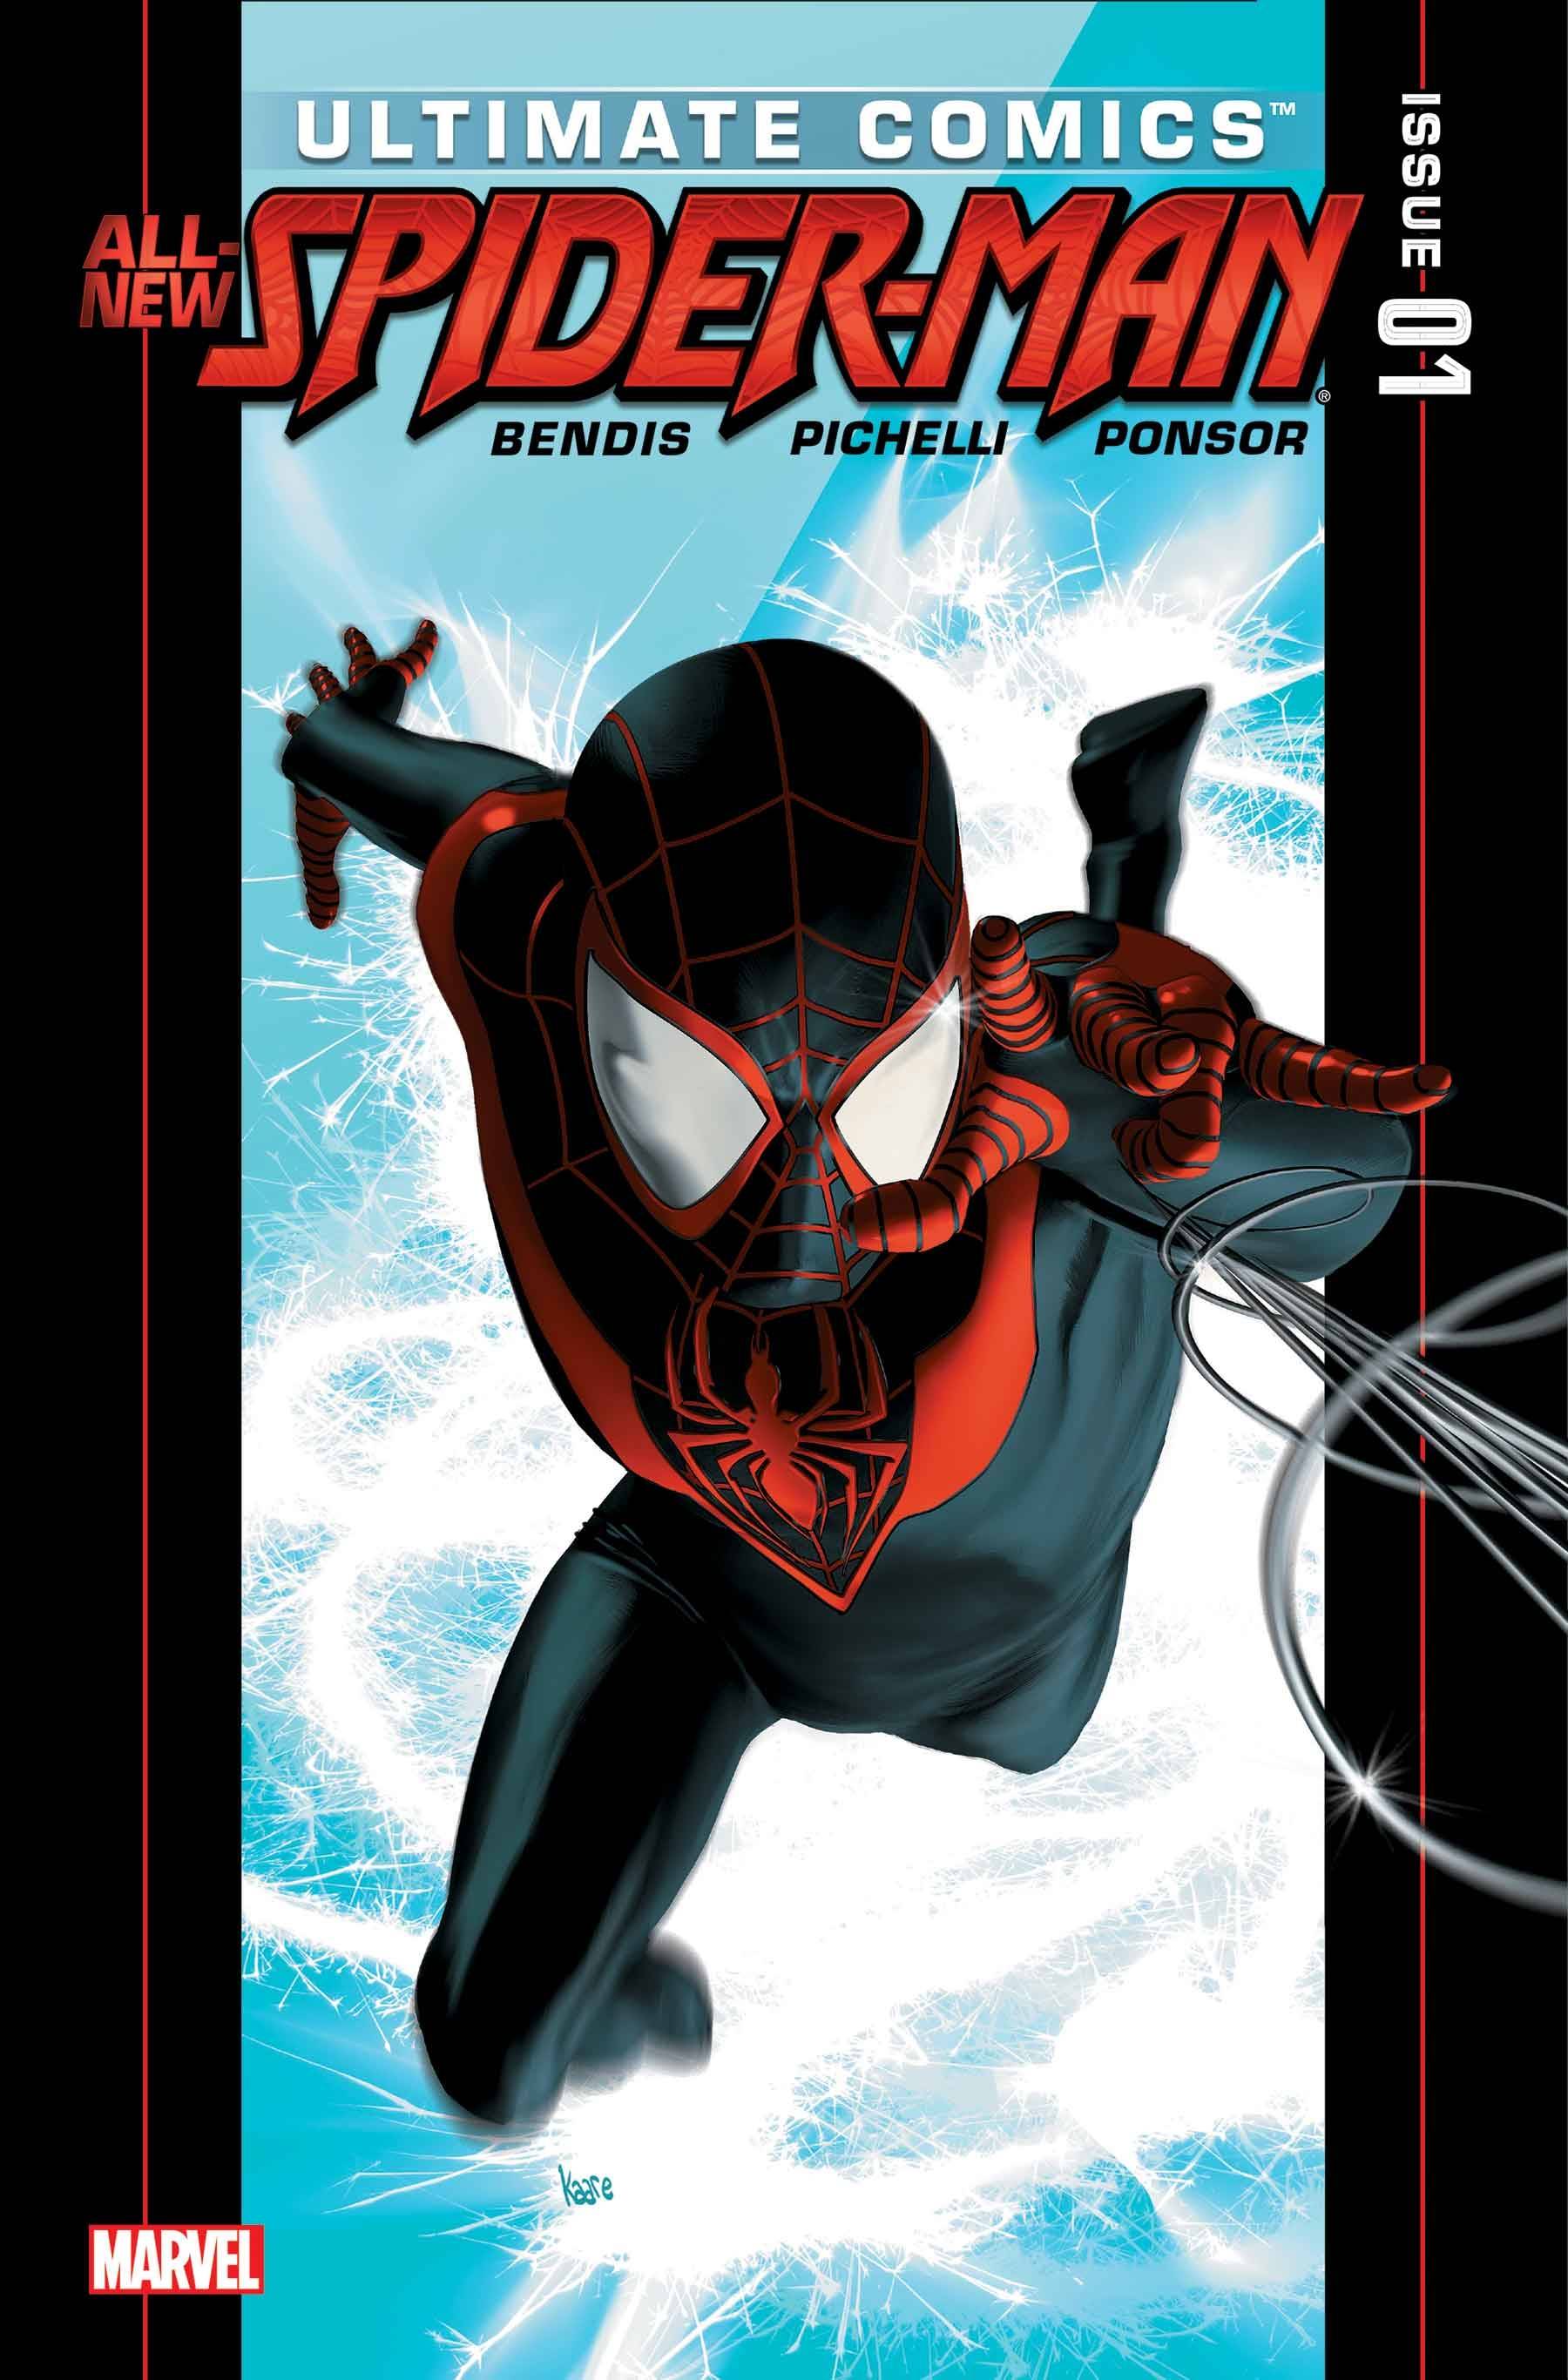 OCT220812 - ULTIMATE COMICS SPIDER-MAN #1 FACSIMILE EDITION - Previews World